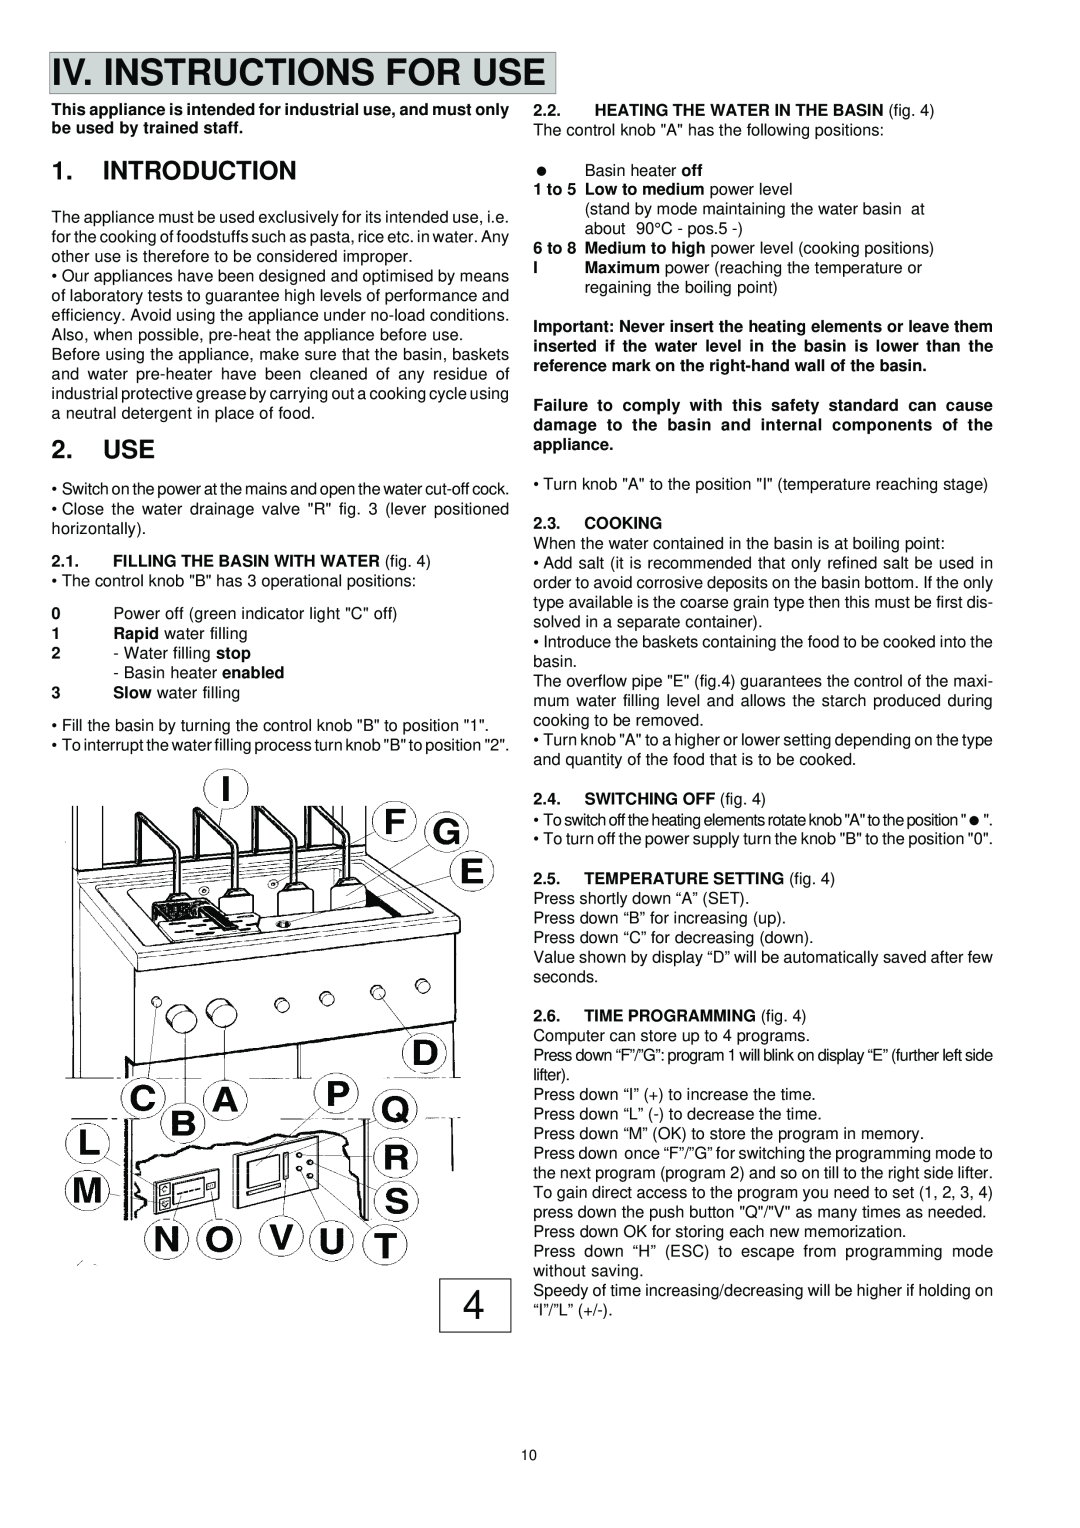 Electrolux PR 700 manual Iv. Instructions For Use, Introduction, 2.USE, FILLING THE BASIN WITH WATER fig, Cooking 